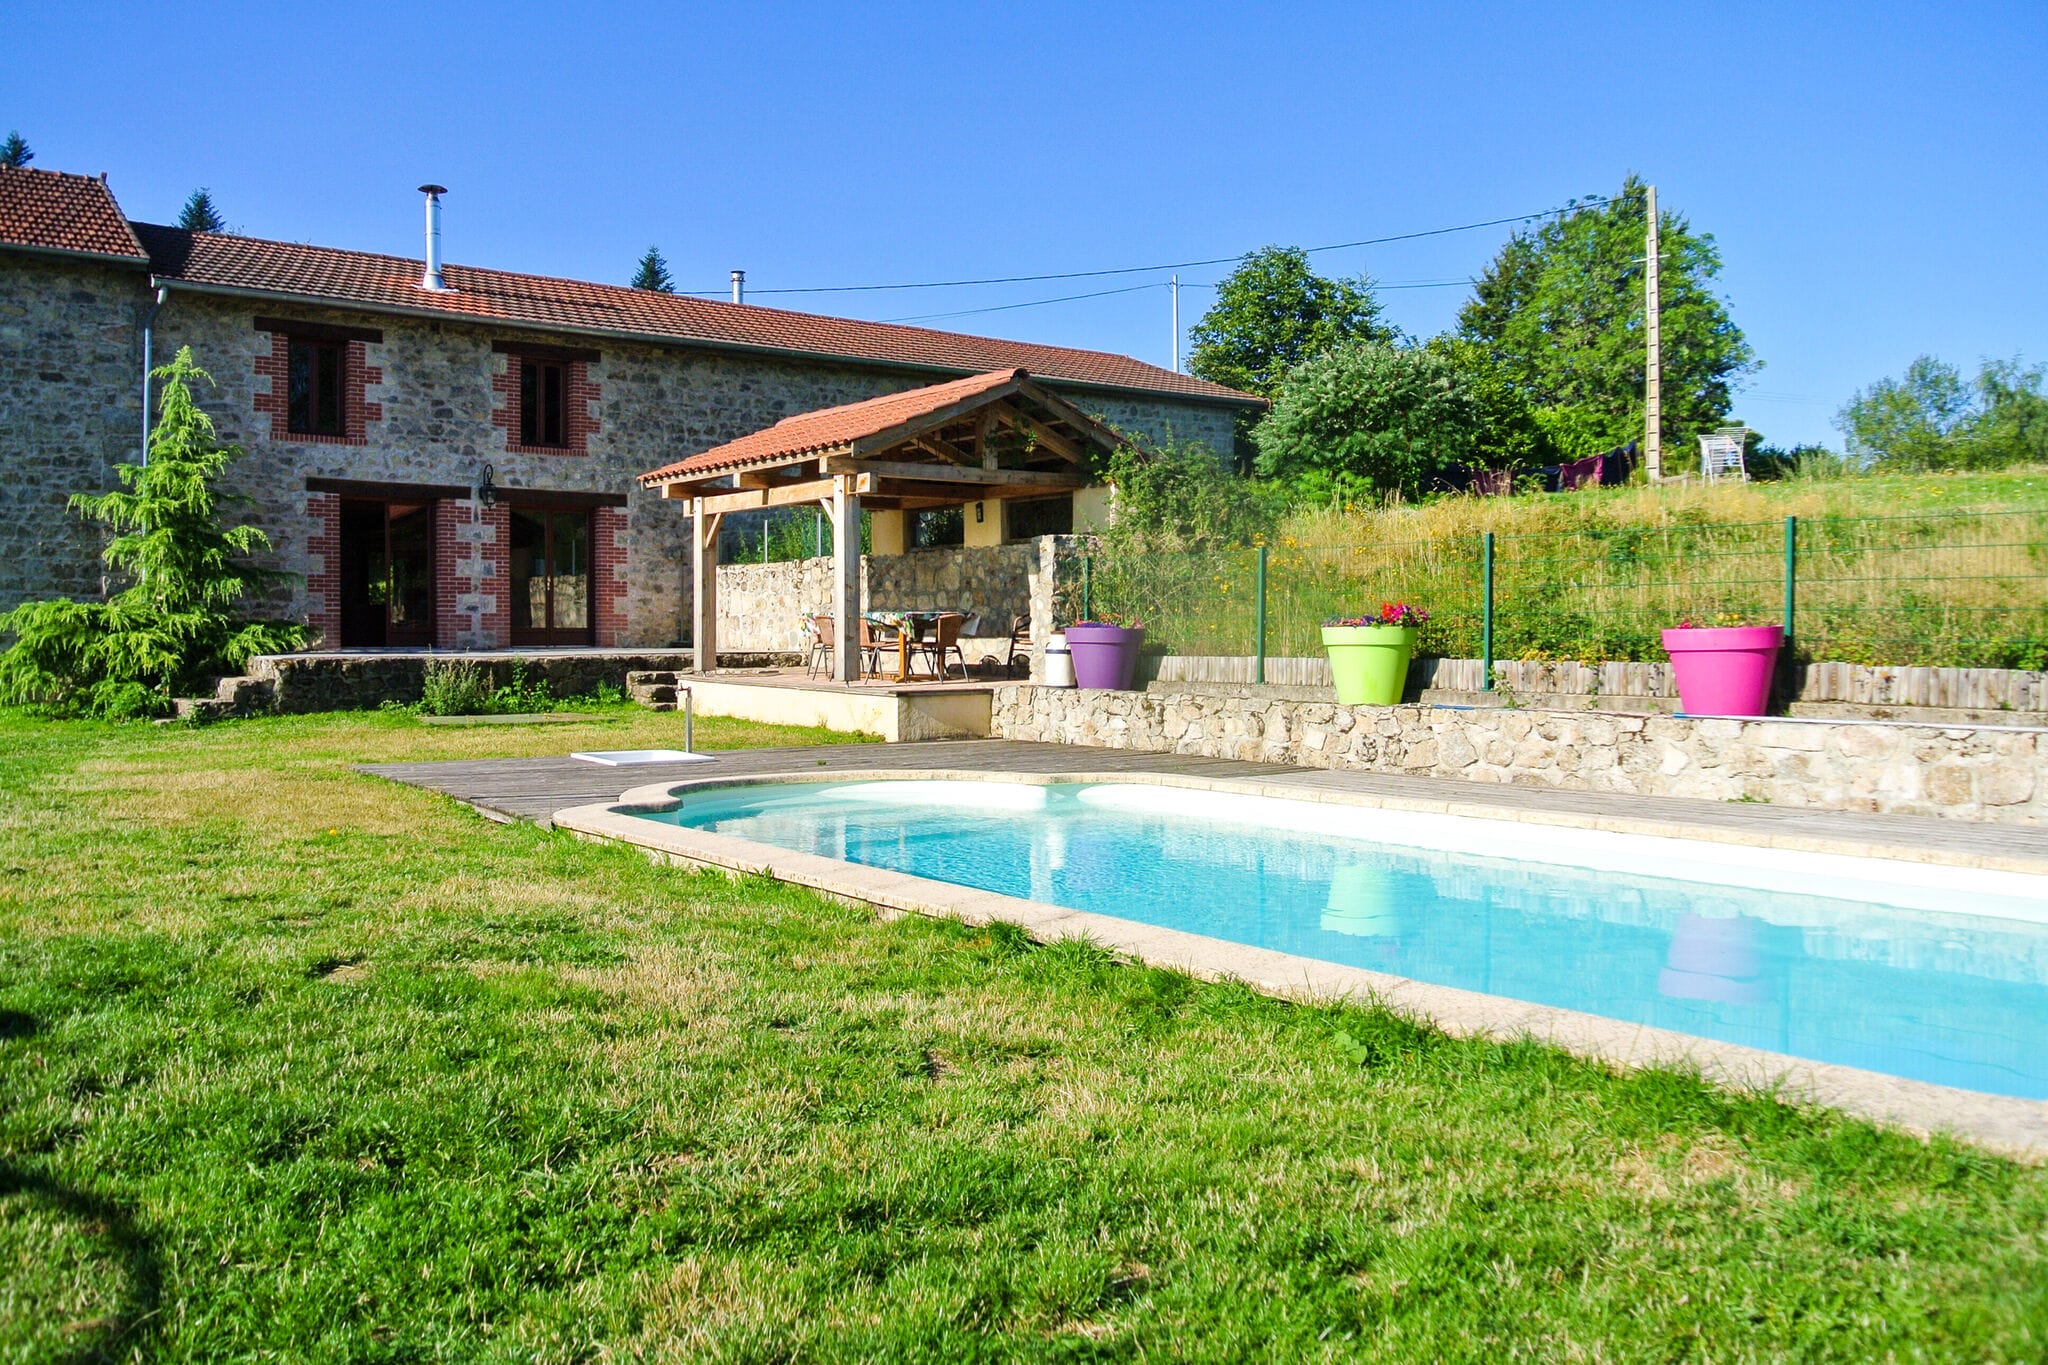 Restored barn in privat domain (3.5 hectares) with pool and 2 lakes